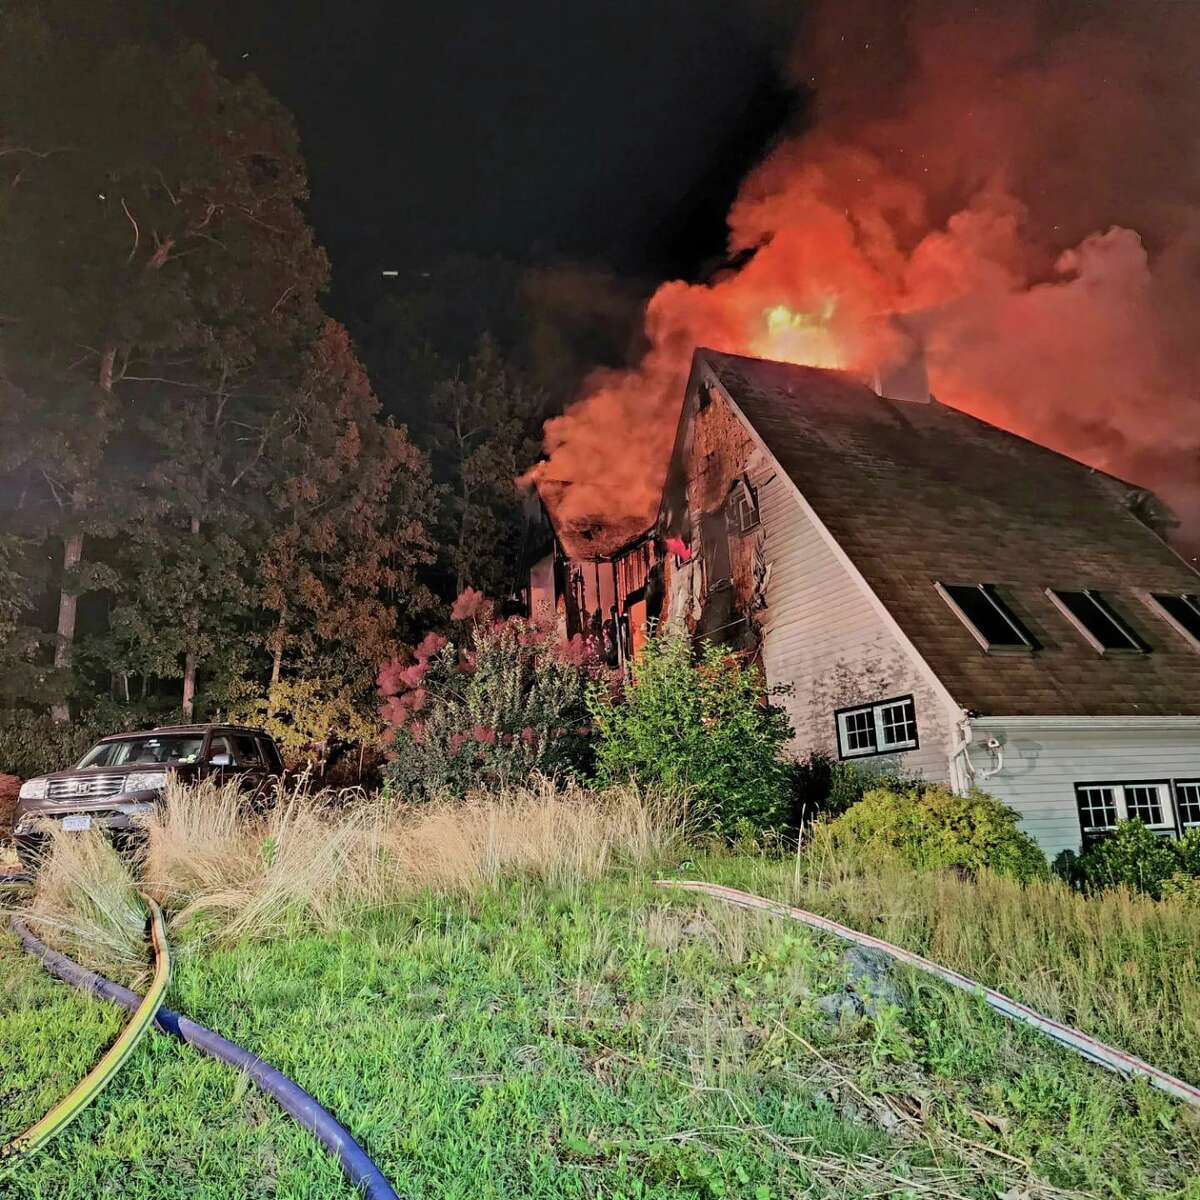 Firefighters responded to a house fire Monday night on Head of Meadow Road in Newtown, Conn.